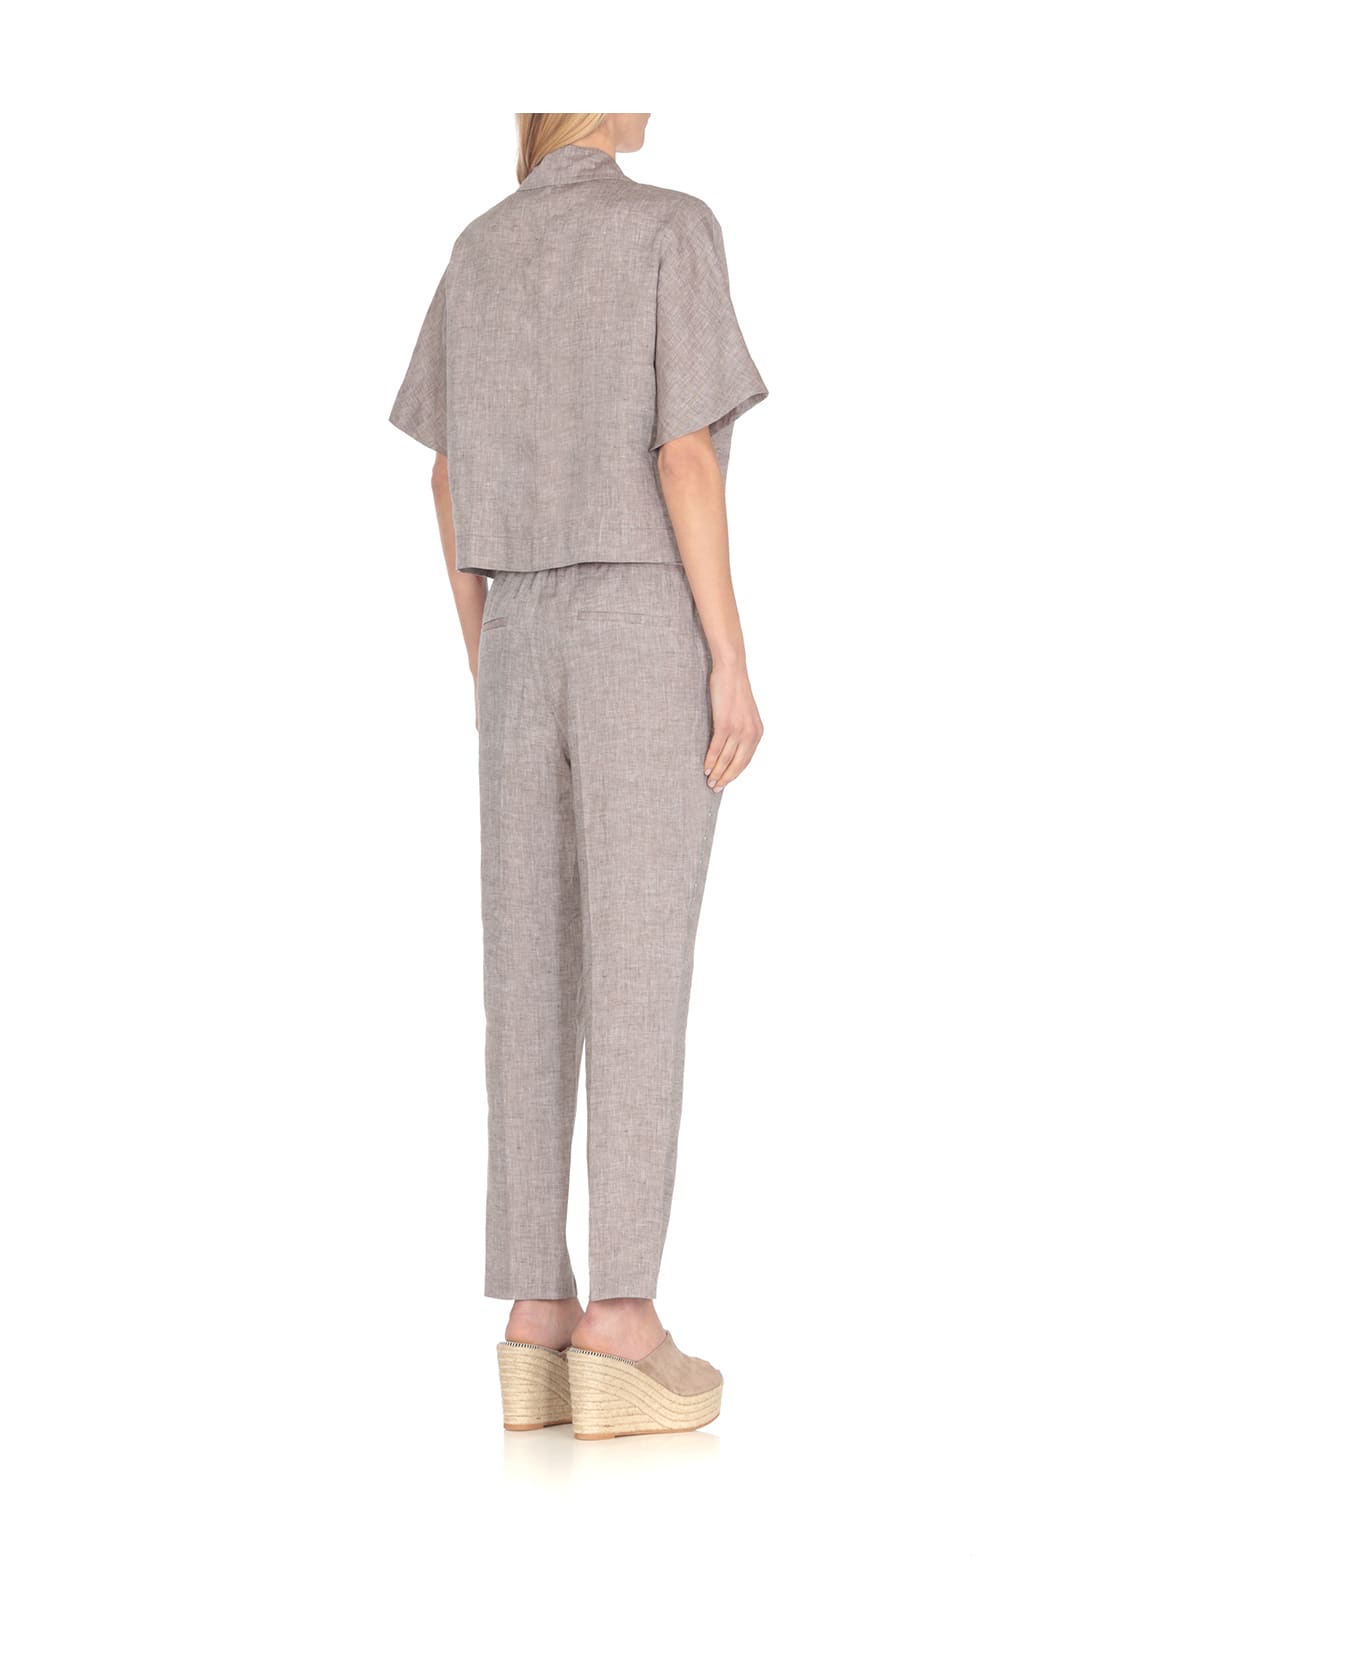 Peserico Linen Trousers - Grey